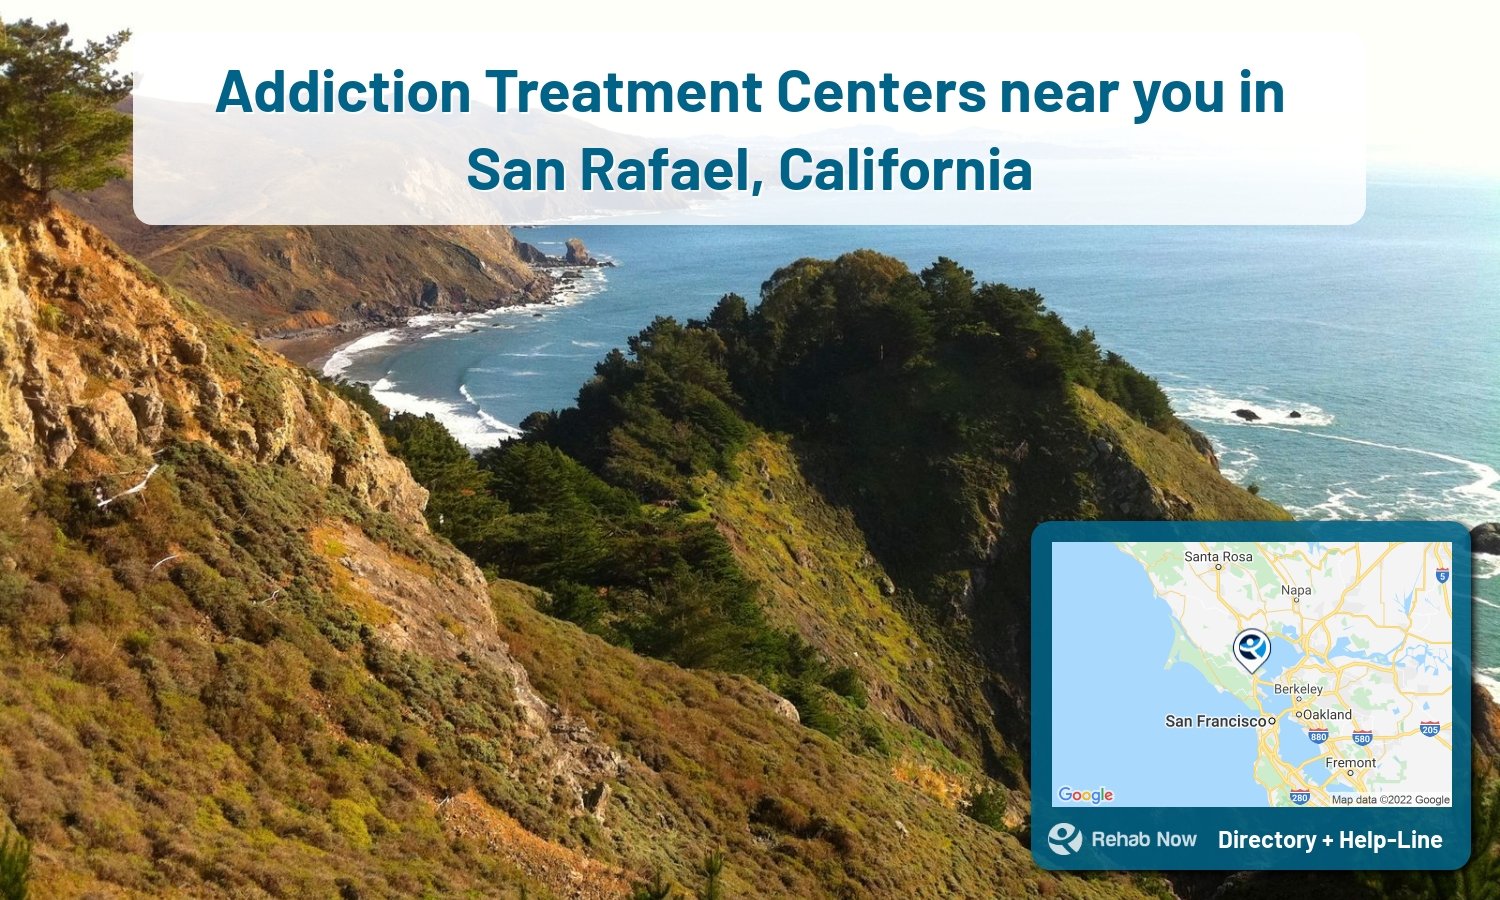 Ready to pick a rehab center in San Rafael? Get off alcohol, opiates, and other drugs, by selecting top drug rehab centers in California